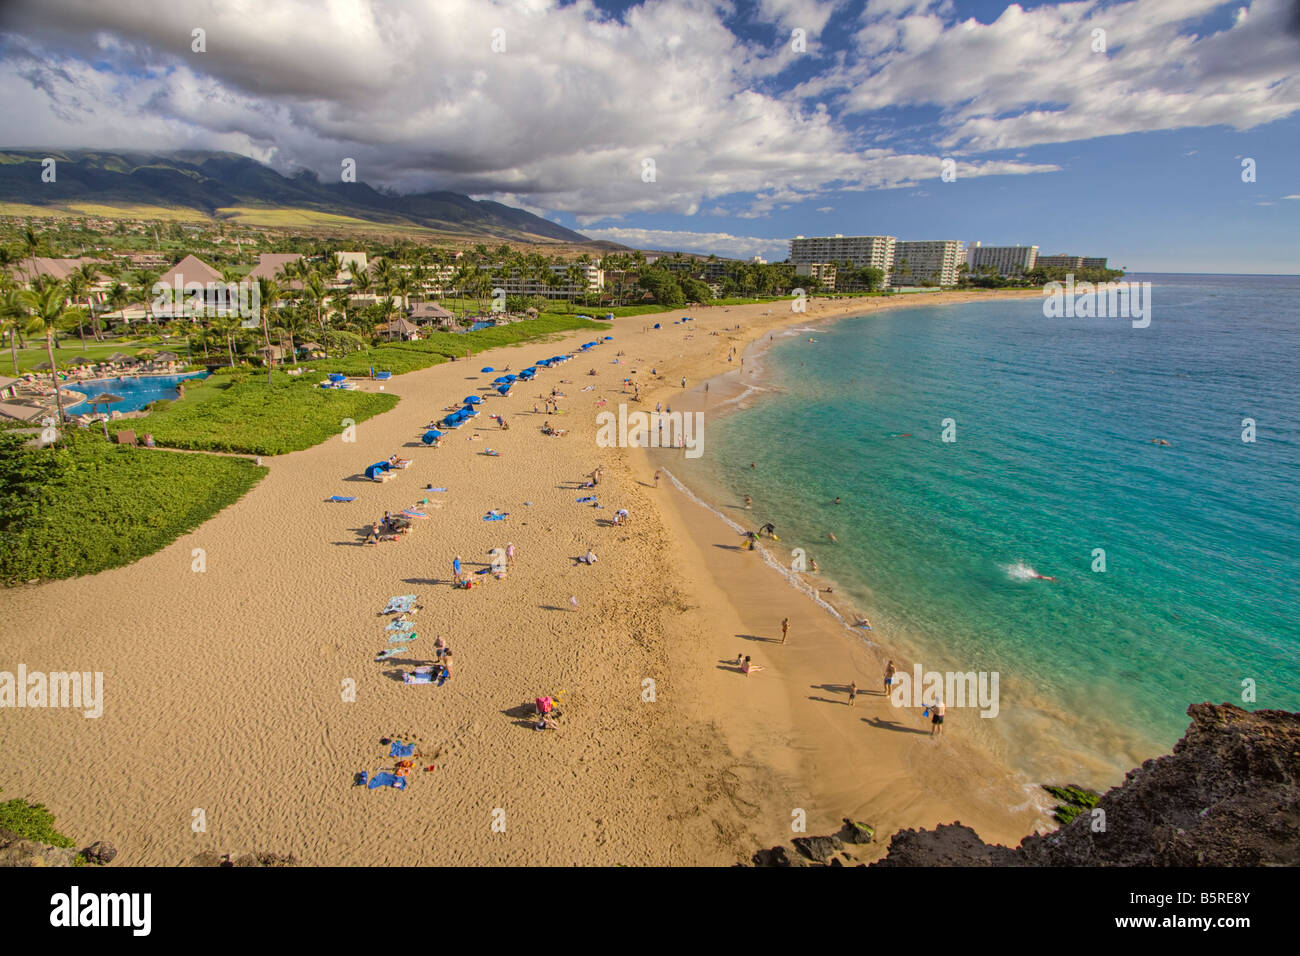 Kaanapali Beach and the West Maui Mountains, Hawaii. This is a HDR image. Stock Photo